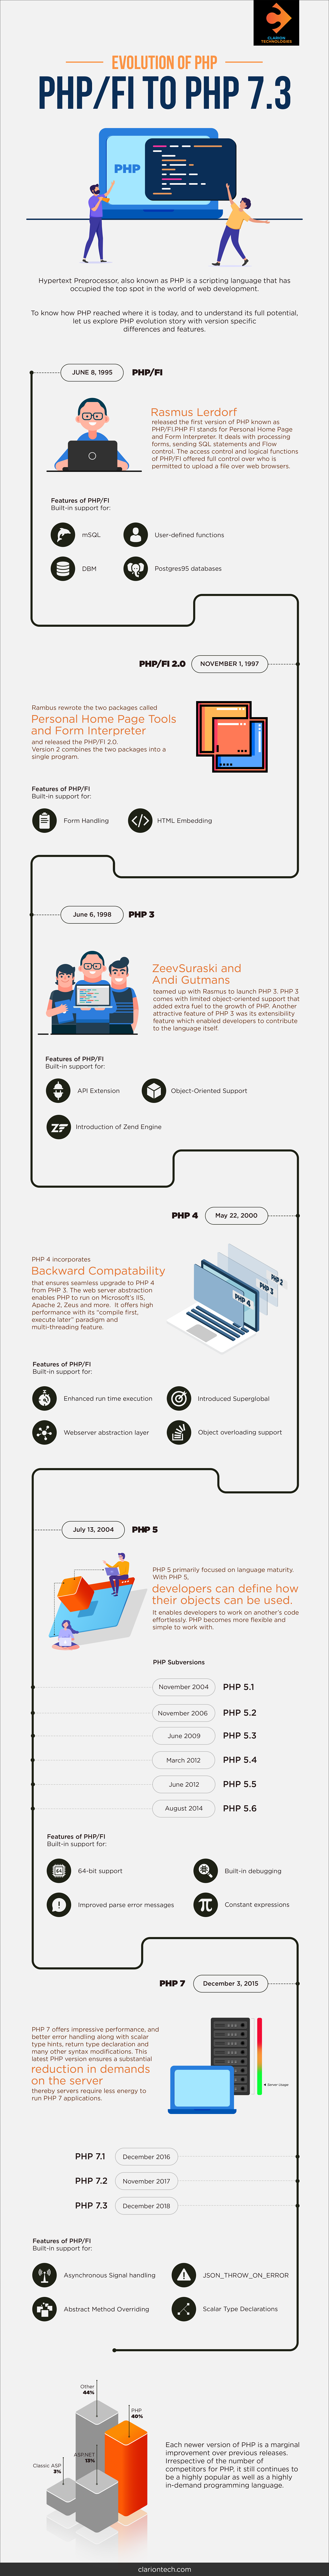 Evolution of PHP - PHP/F1 to PHP 7.3 #infographic